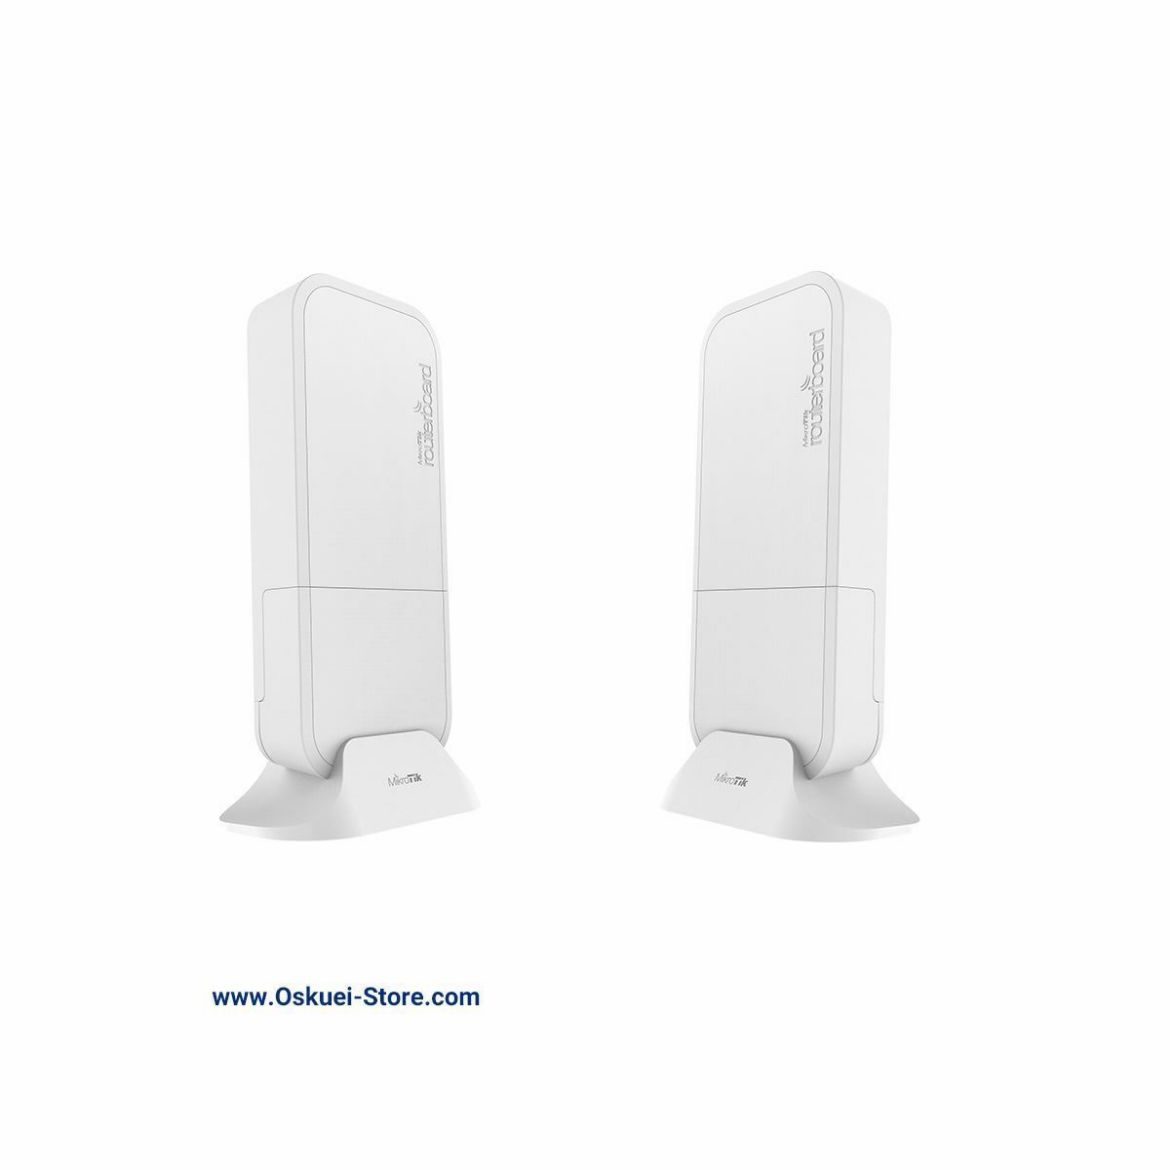 MikroTikRBwAPG-60adkit Wireless Router Left and Right